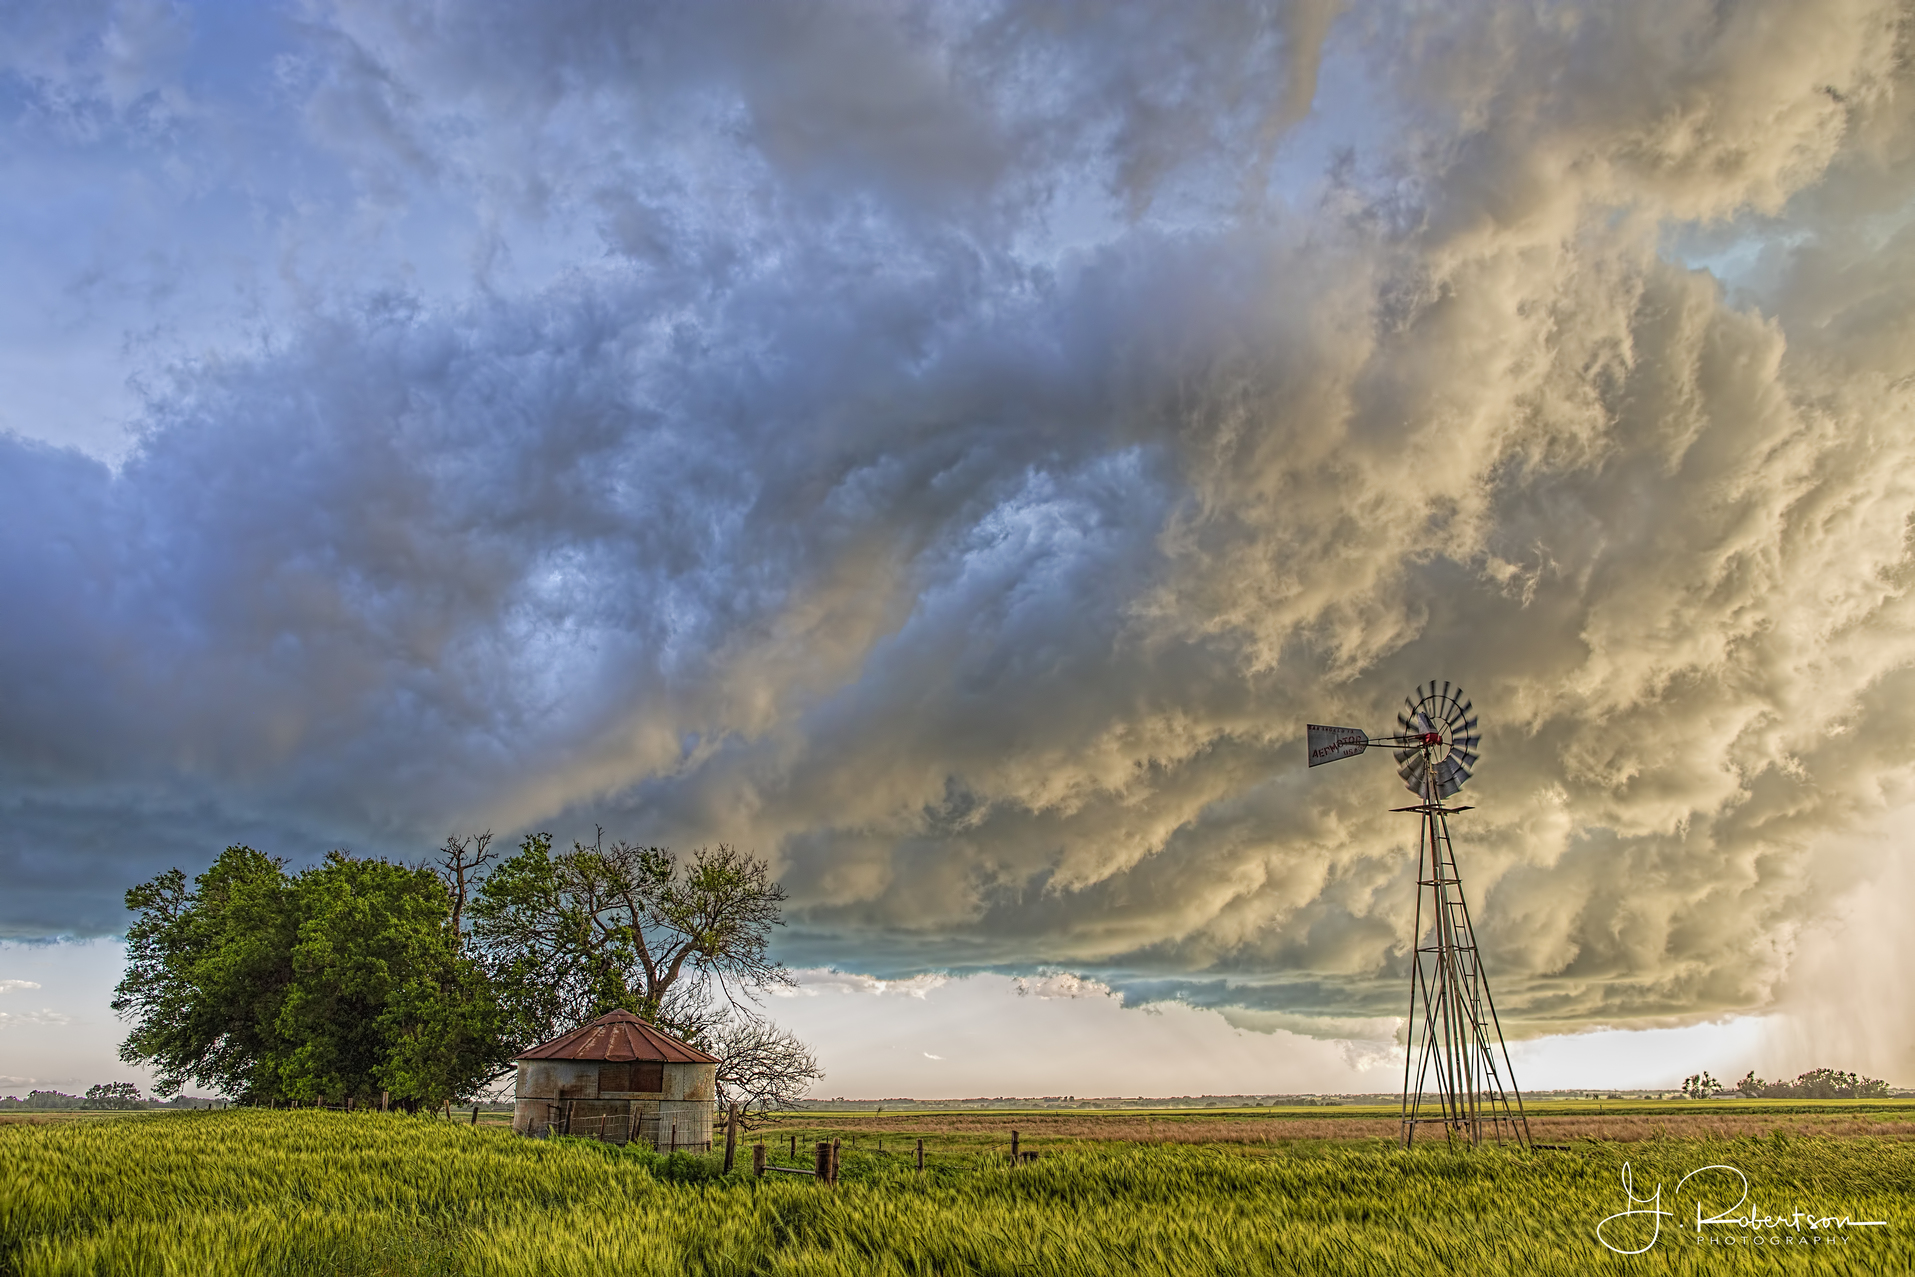 The back side of a gust front passes over a grain silo and windmill in Major County Oklahoma